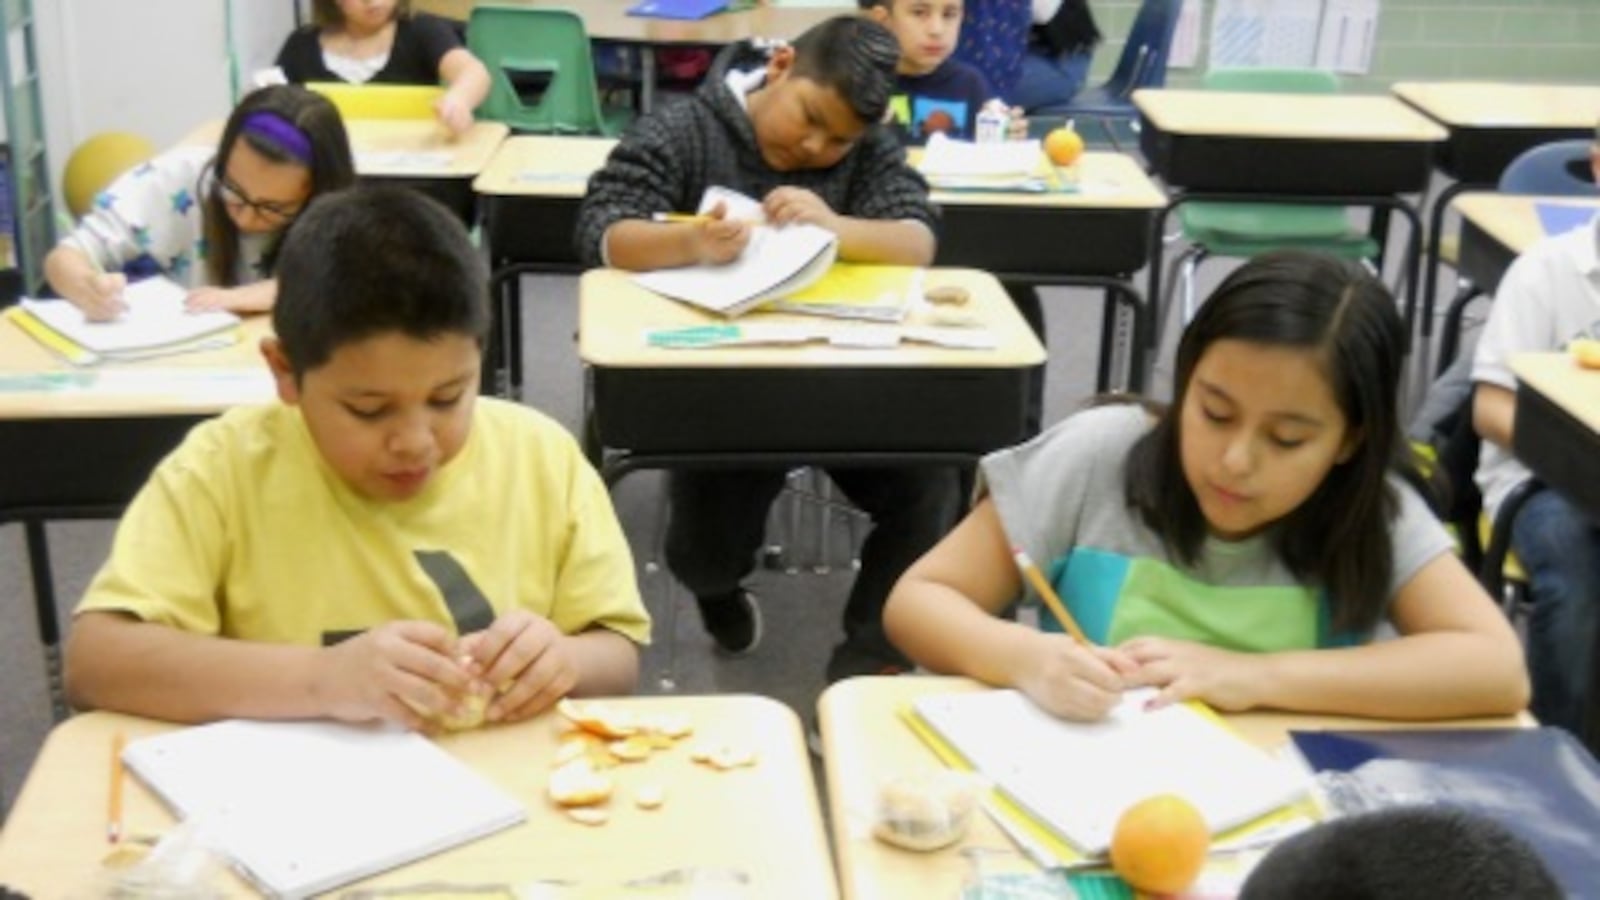 Fourth-graders at Alsup Elementary in Commerce City have breakfast in the classroom.